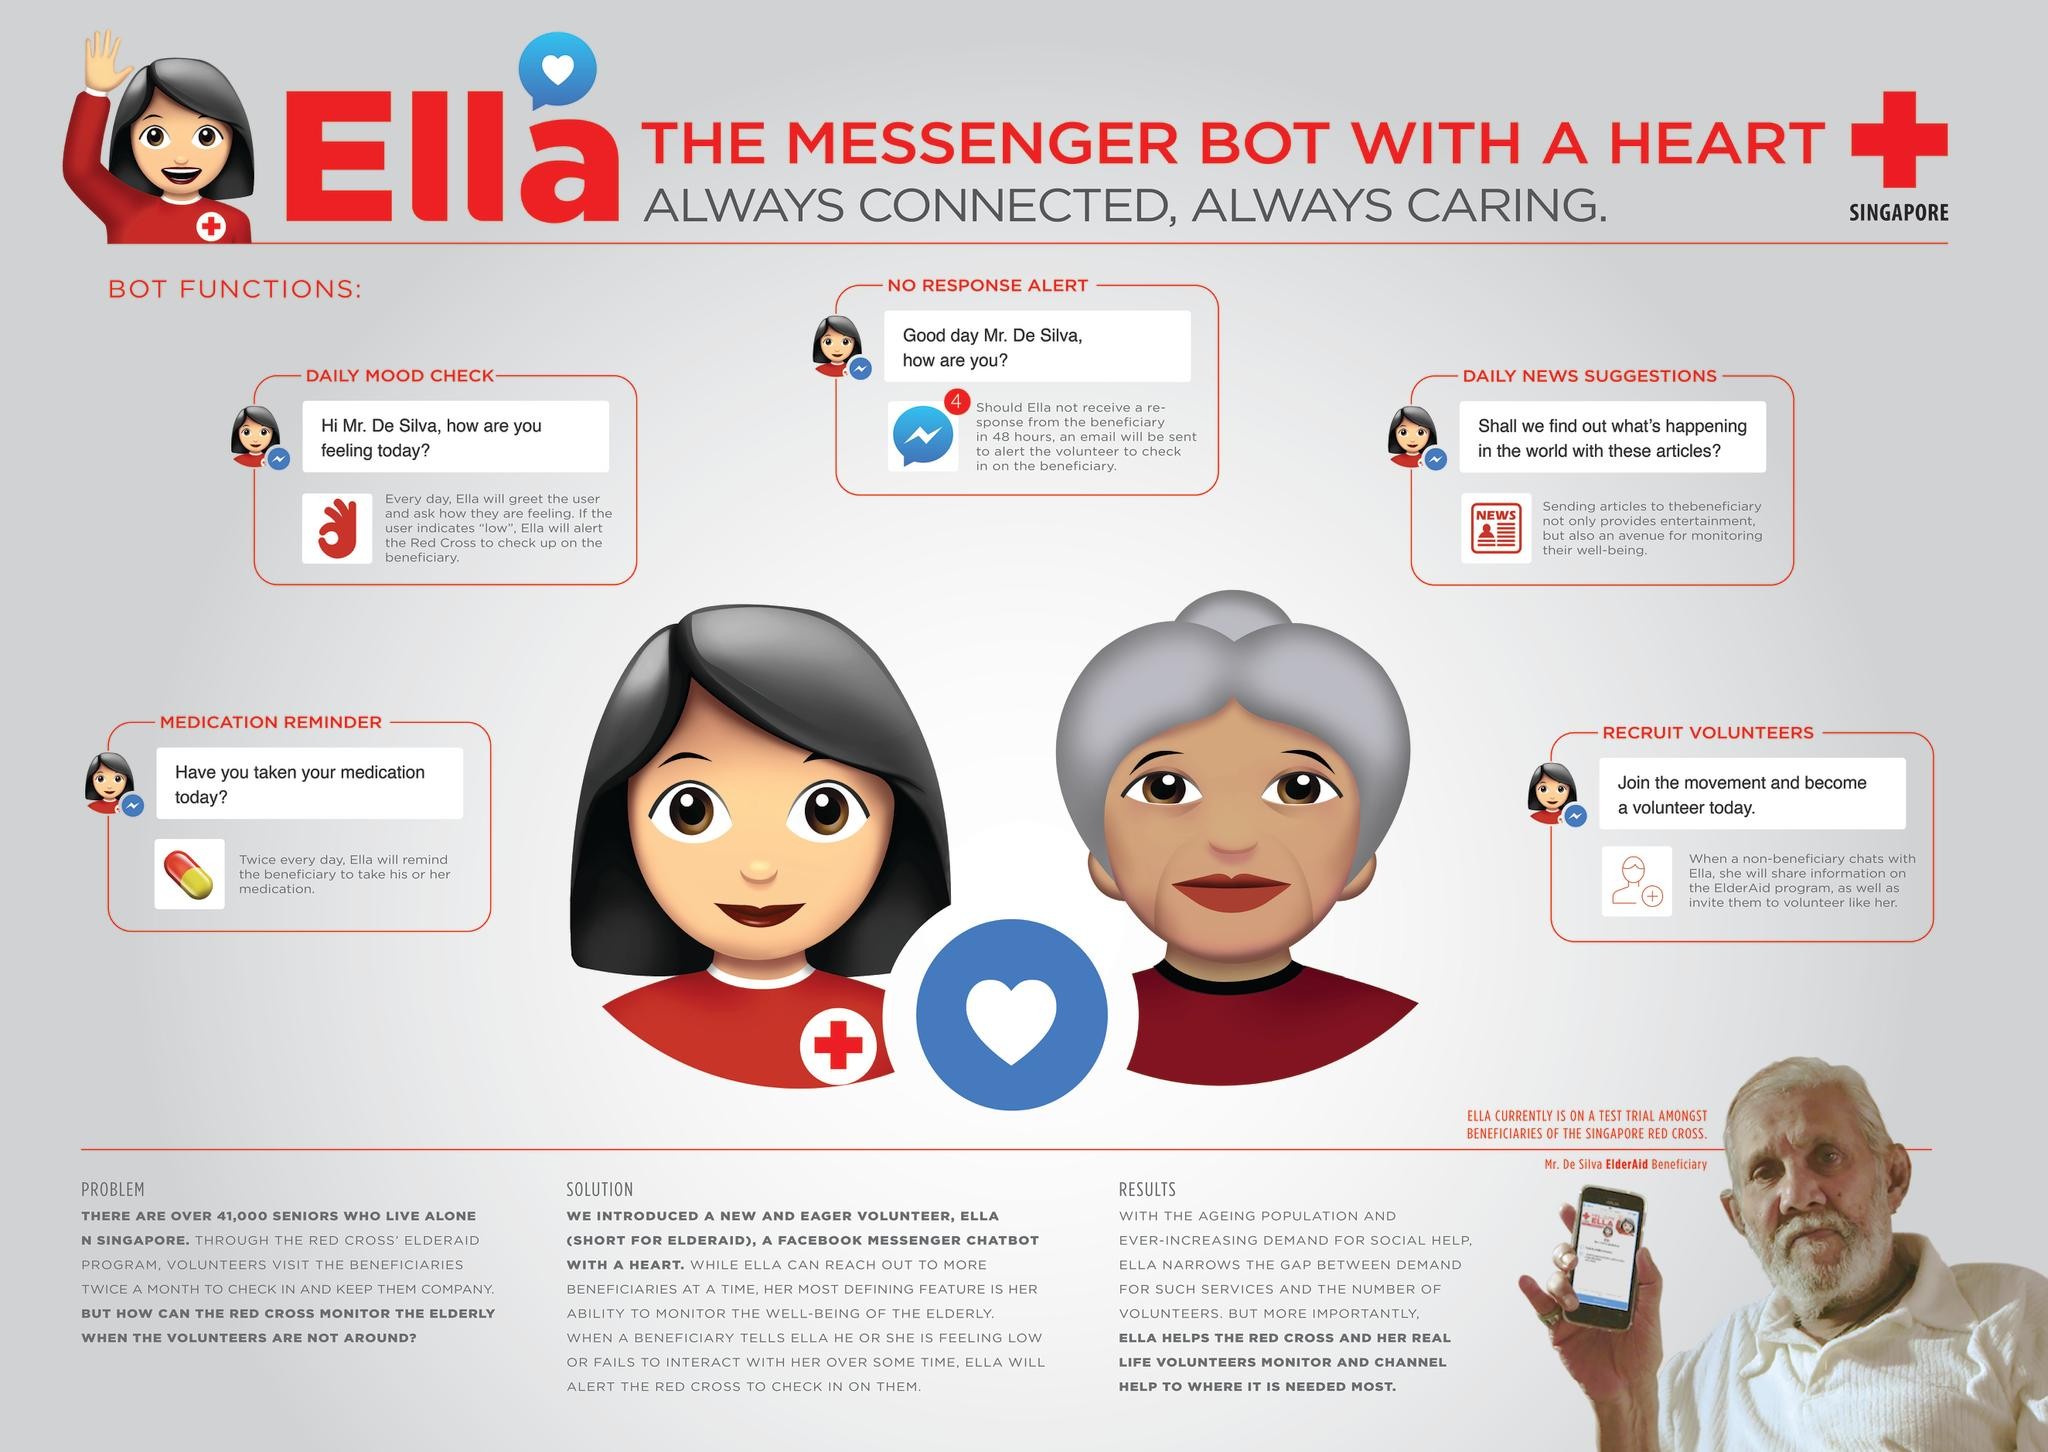 Ella, The Messenger Bot with a Heart